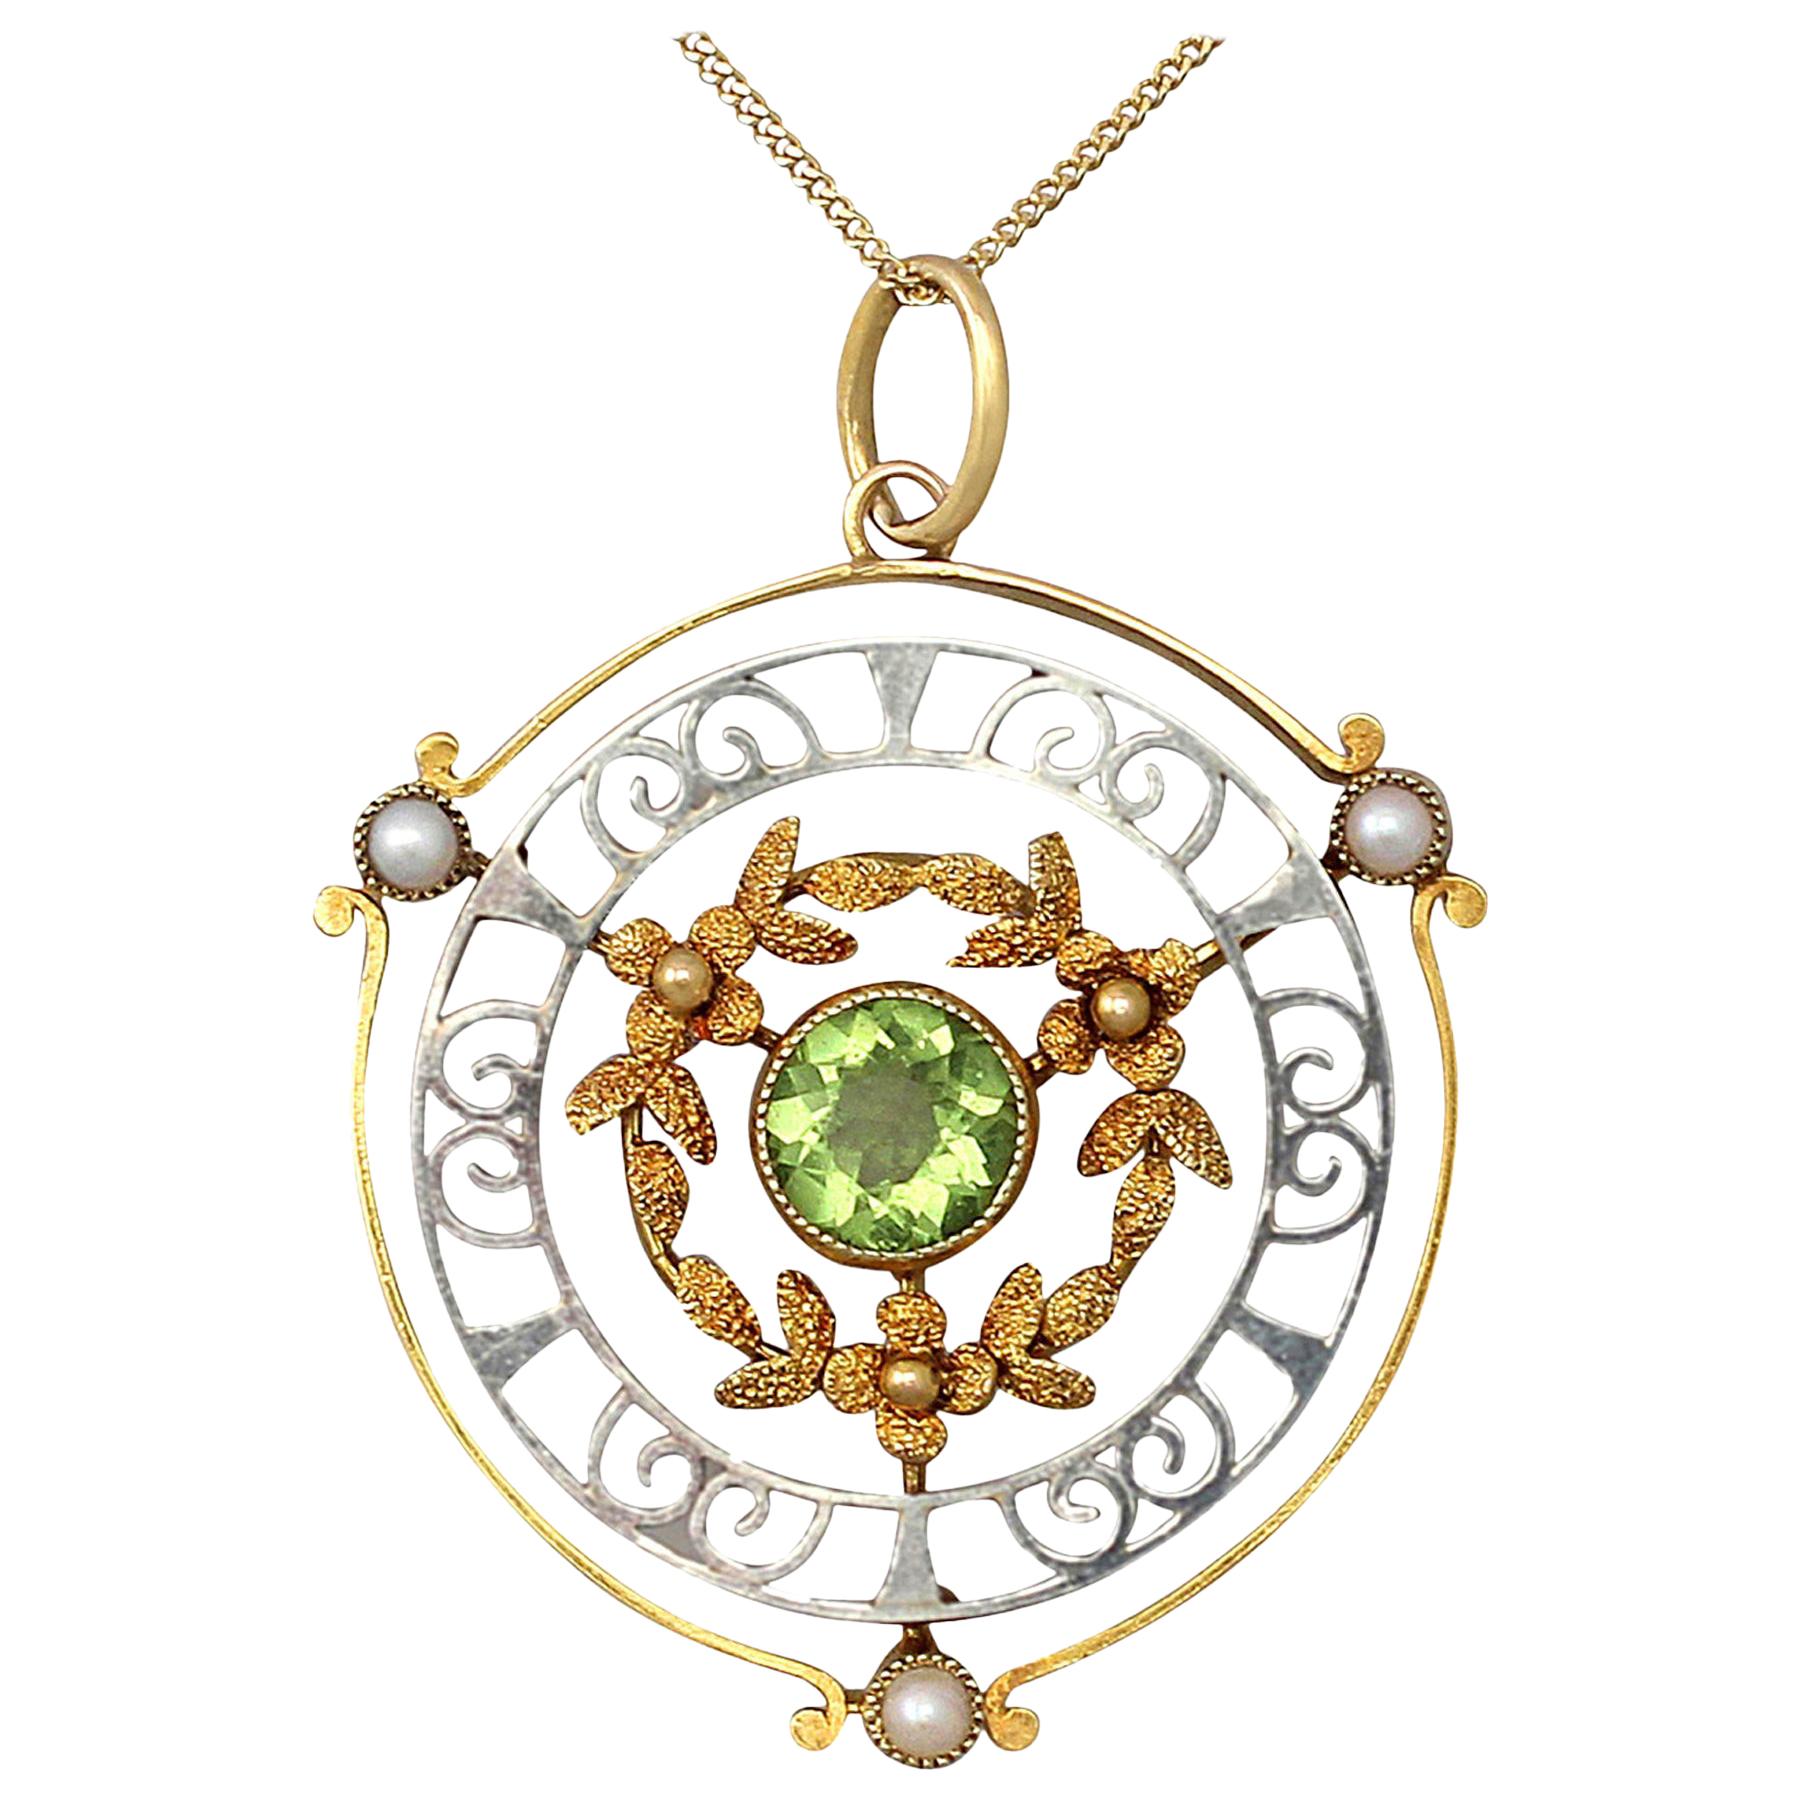 Antique 1900s Peridot and Pearl Yellow Gold and White Gold Pendant